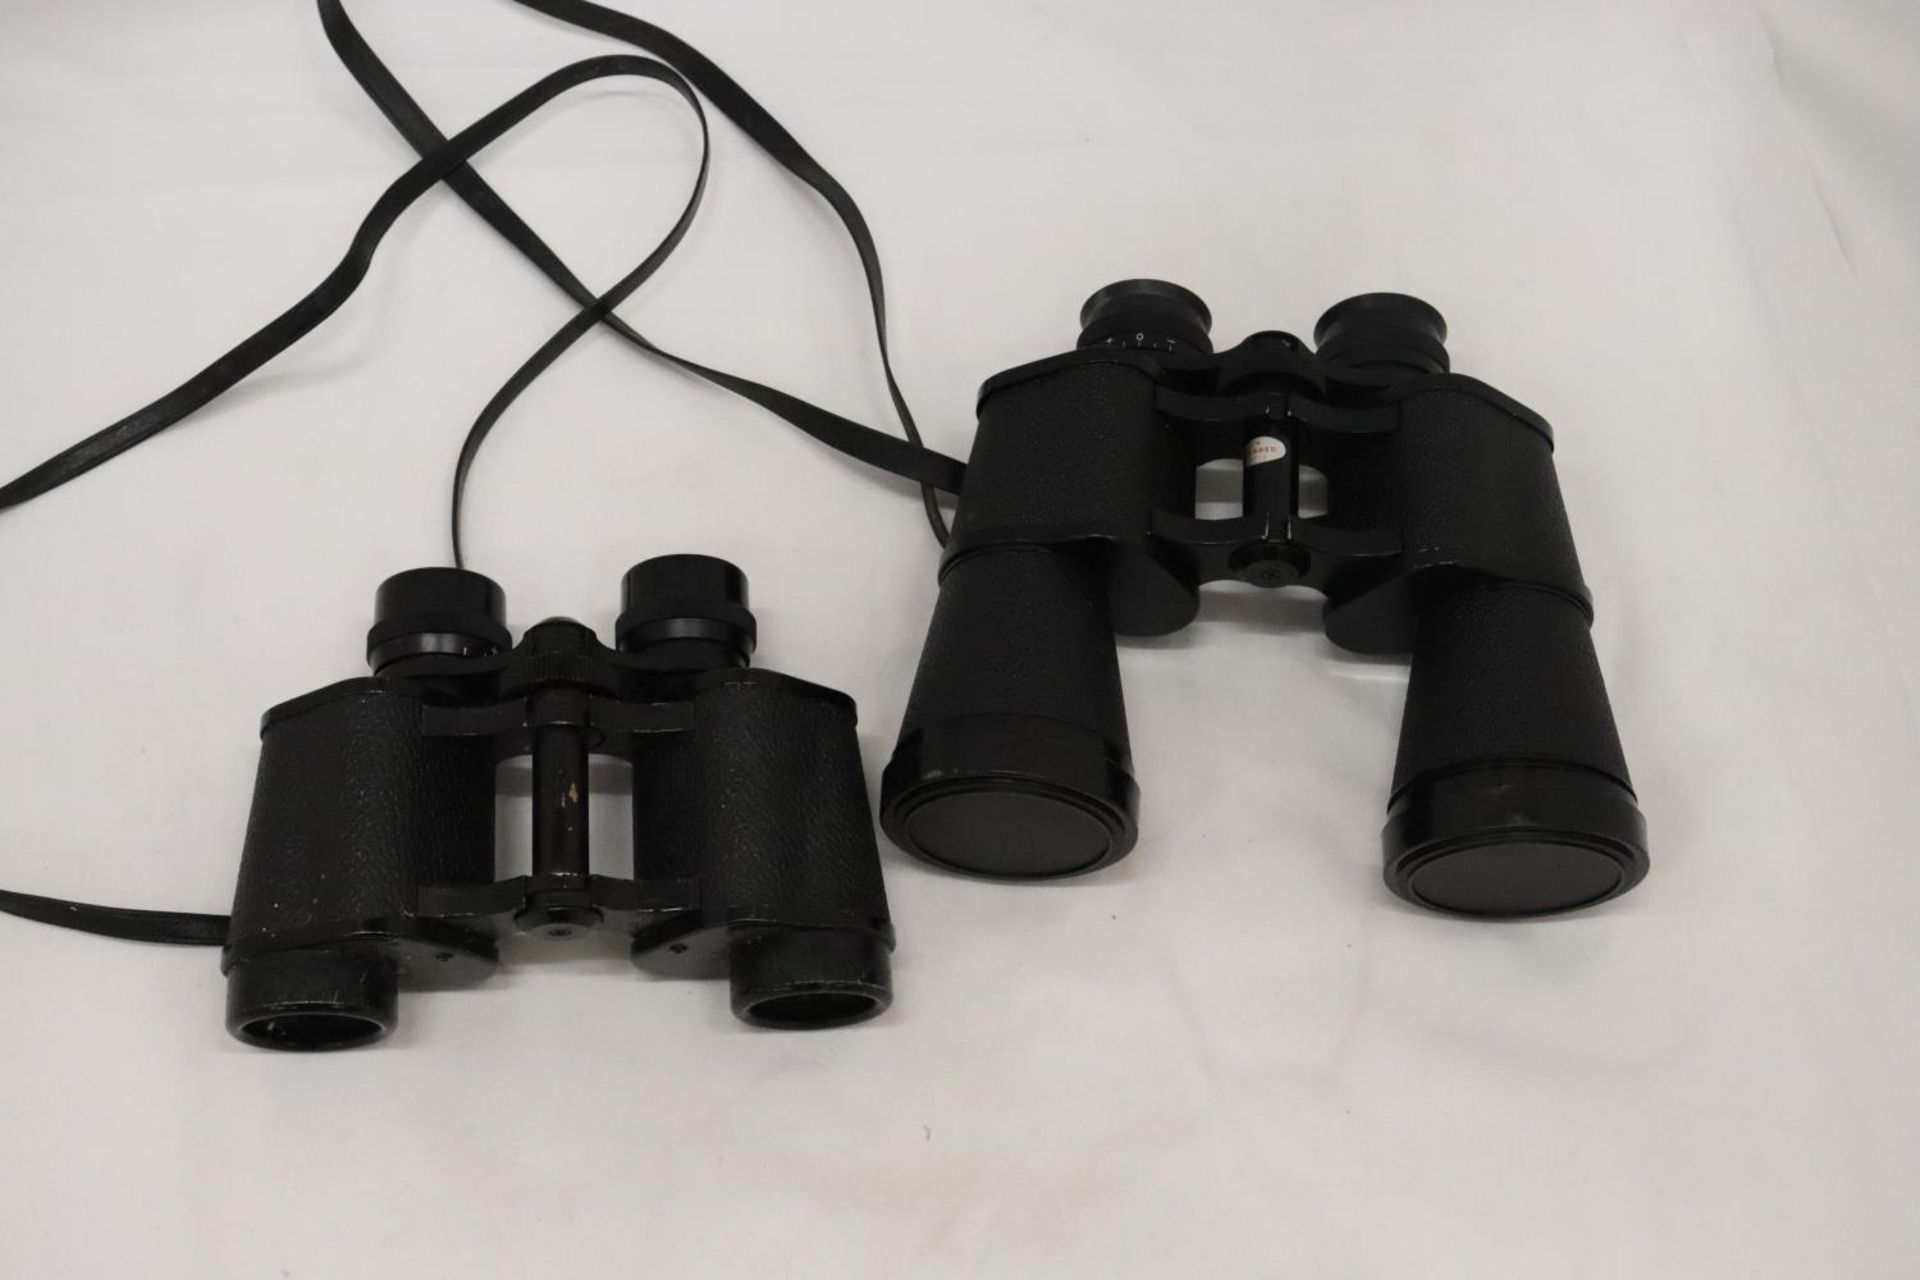 TWO PAIRS OF BINOCULARS SUPER ZENITH 20 X 50 AND FIELD GLASSES 8 X30 - Image 5 of 6